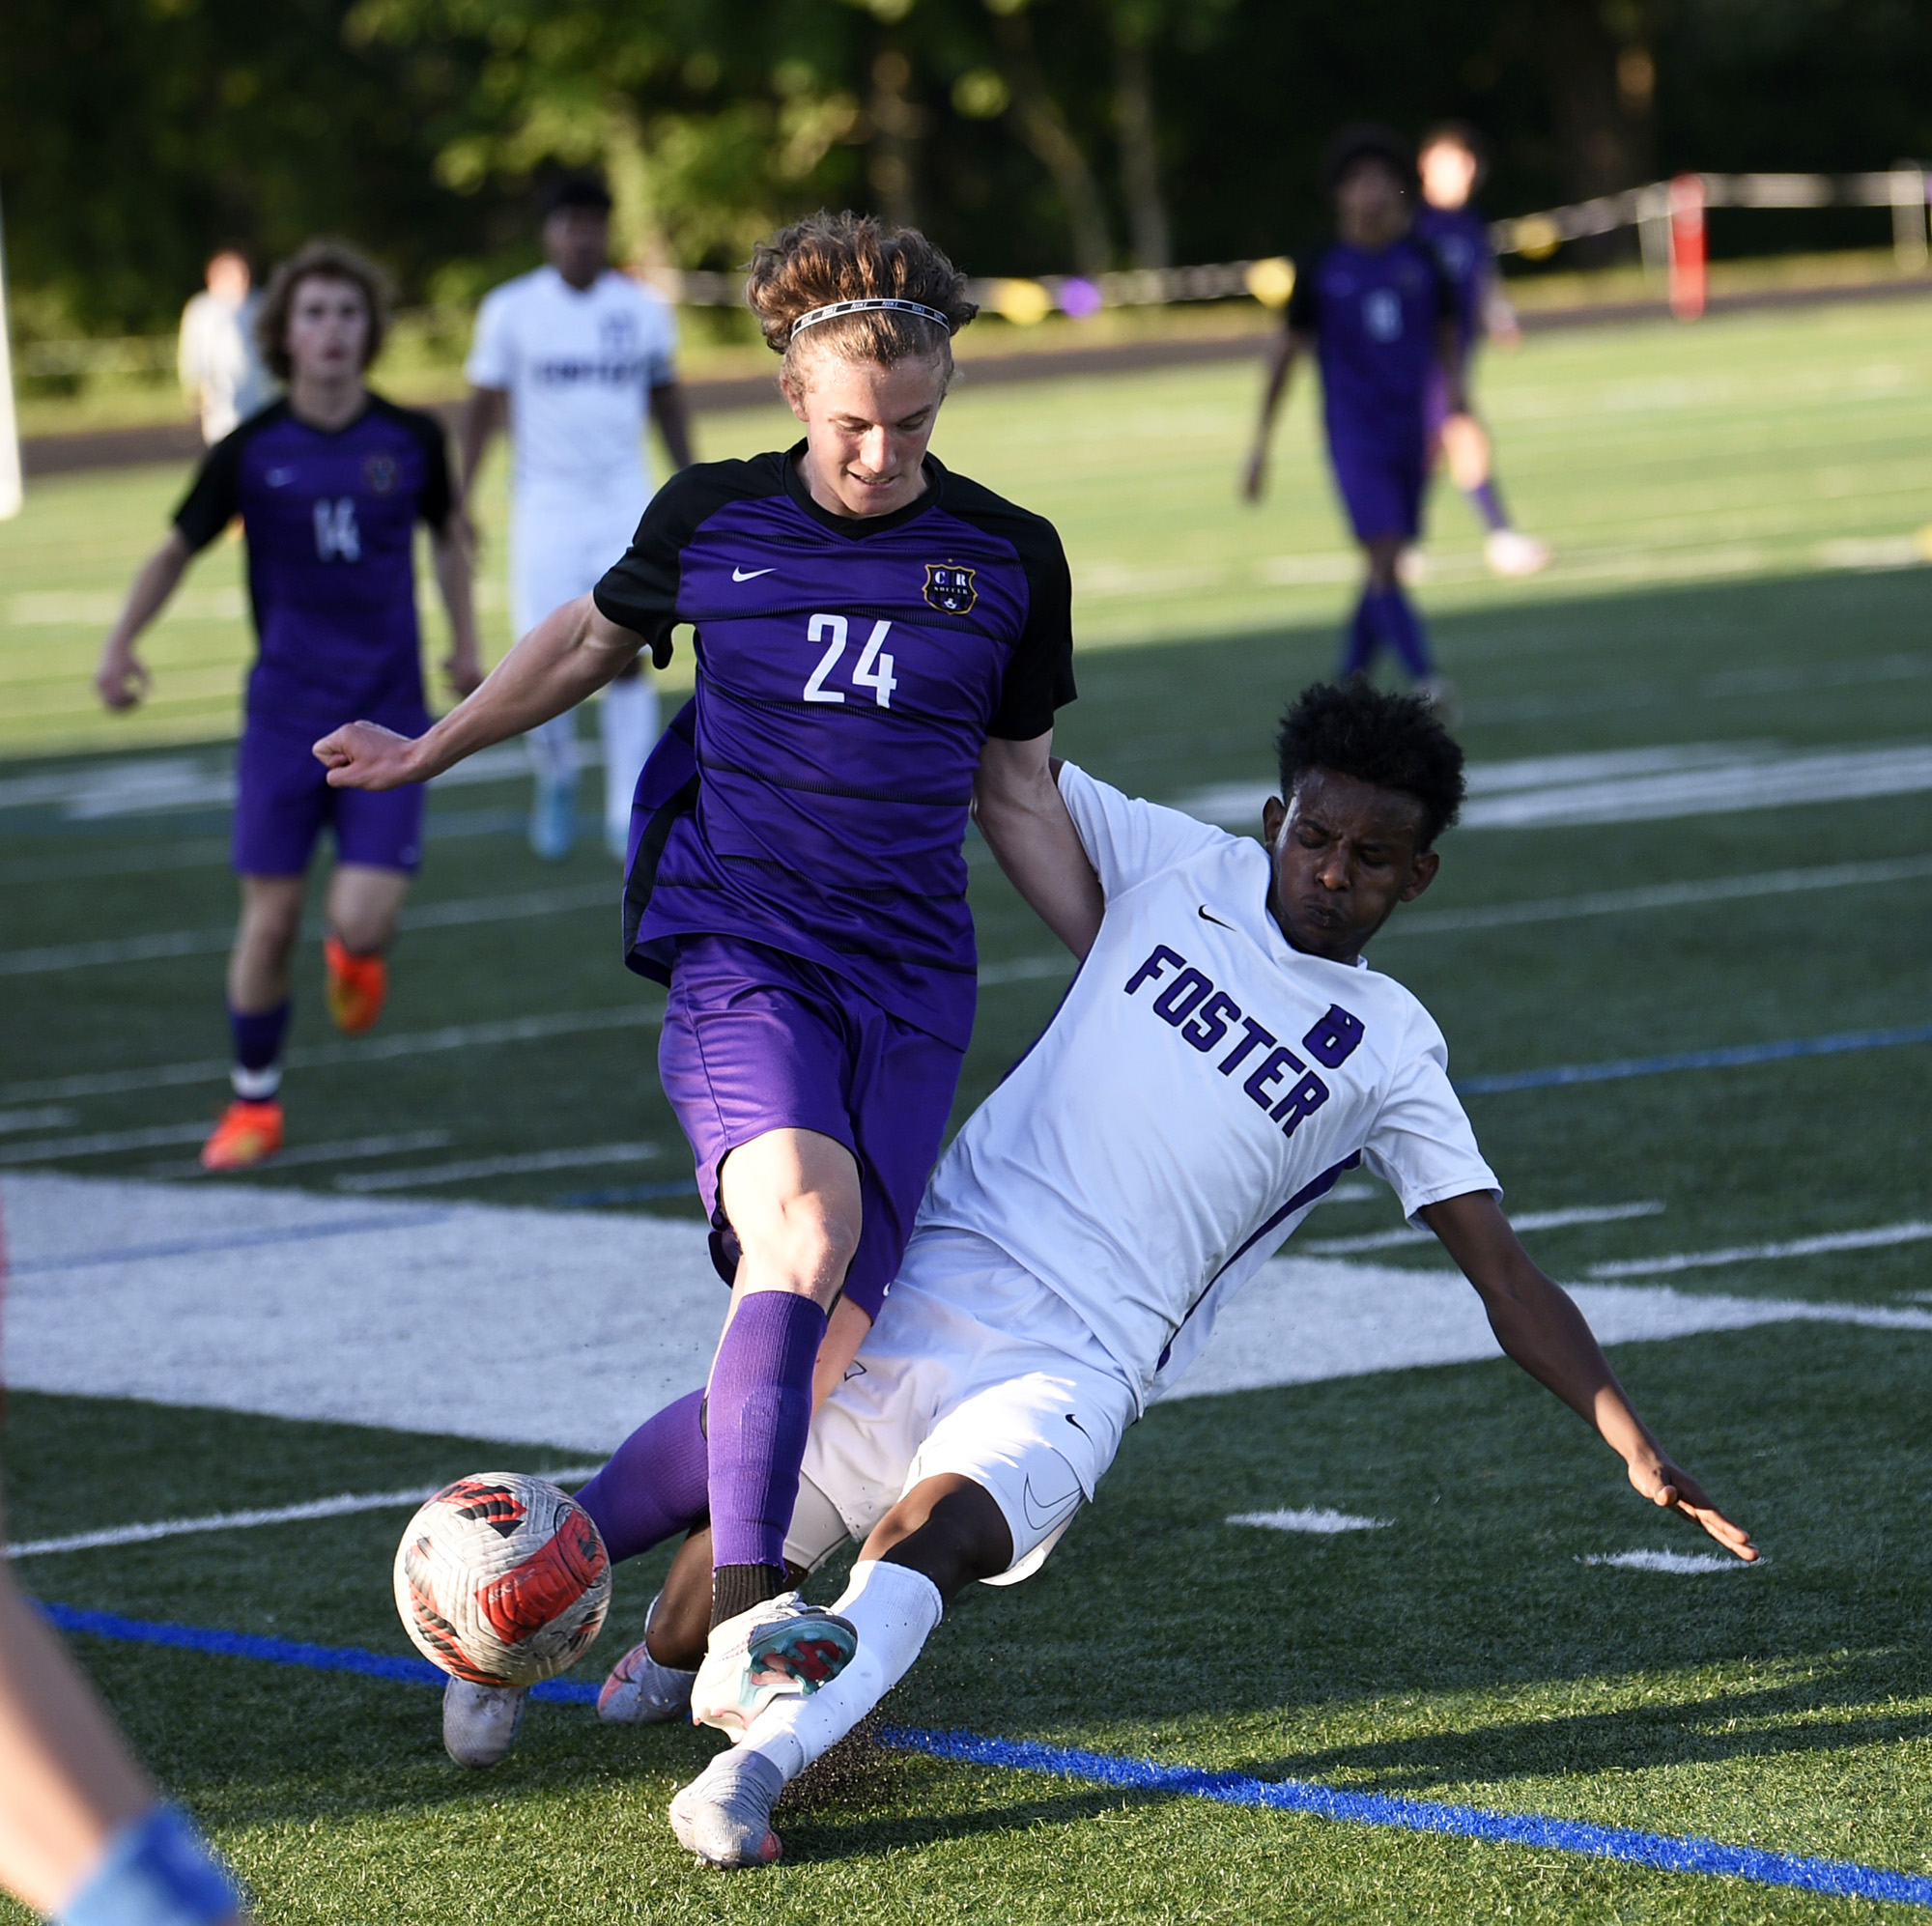 Columbia River's Tyler Brown (24) battles for possession of the ball with Foster's Anawar Kimo during River's 3-0 win in a Class 2A boys soccer state first-round playoff game at Columbia River High School on Wednesday, May 17, 2023.